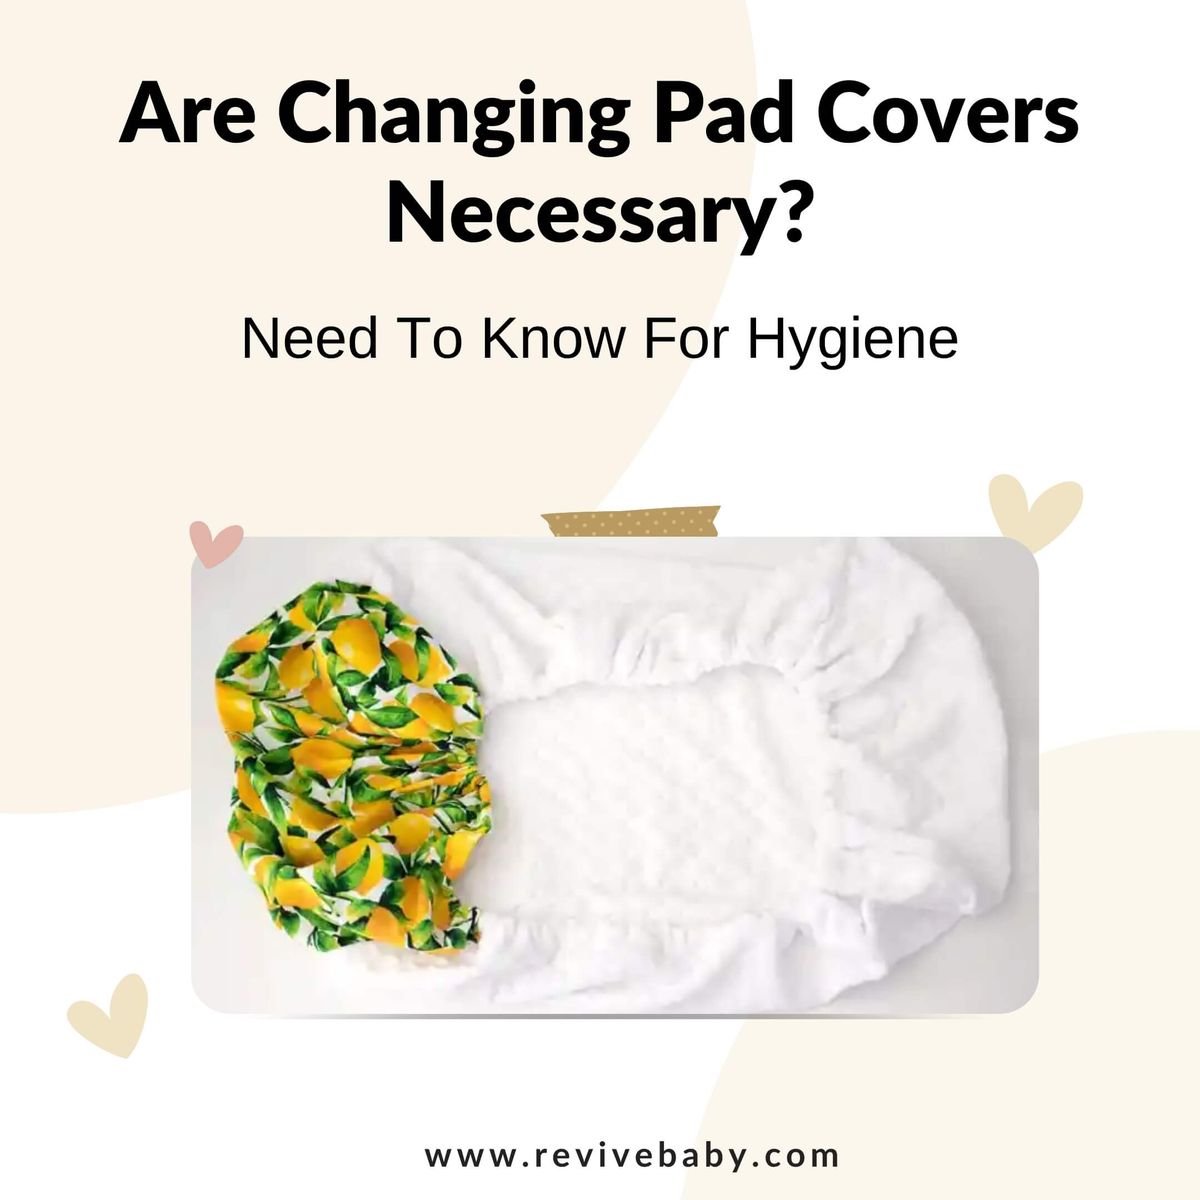 Are Changing Pad Covers Necessary